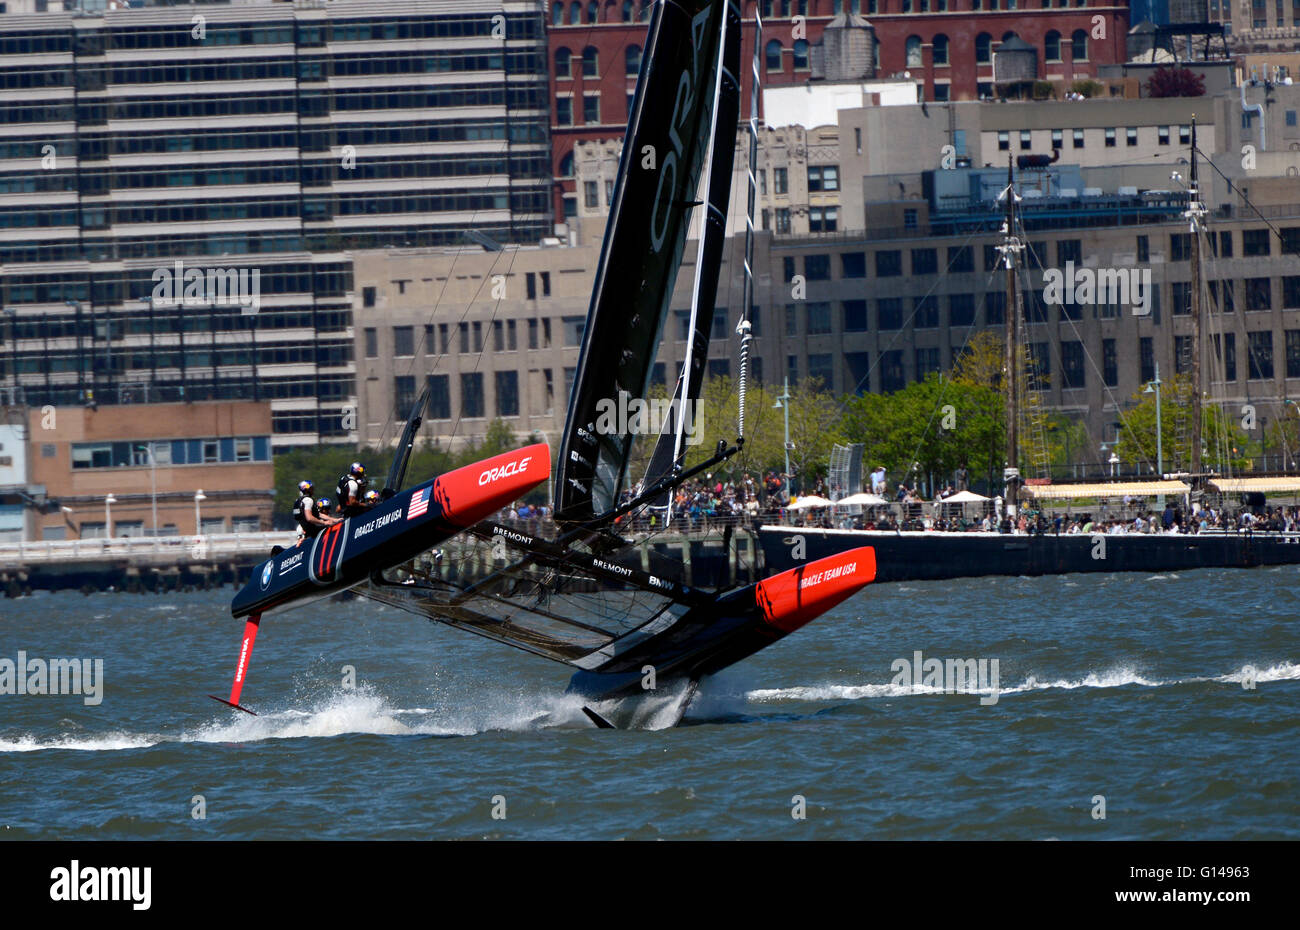 LOUIS VUITTON AMERICA'S CUP NY